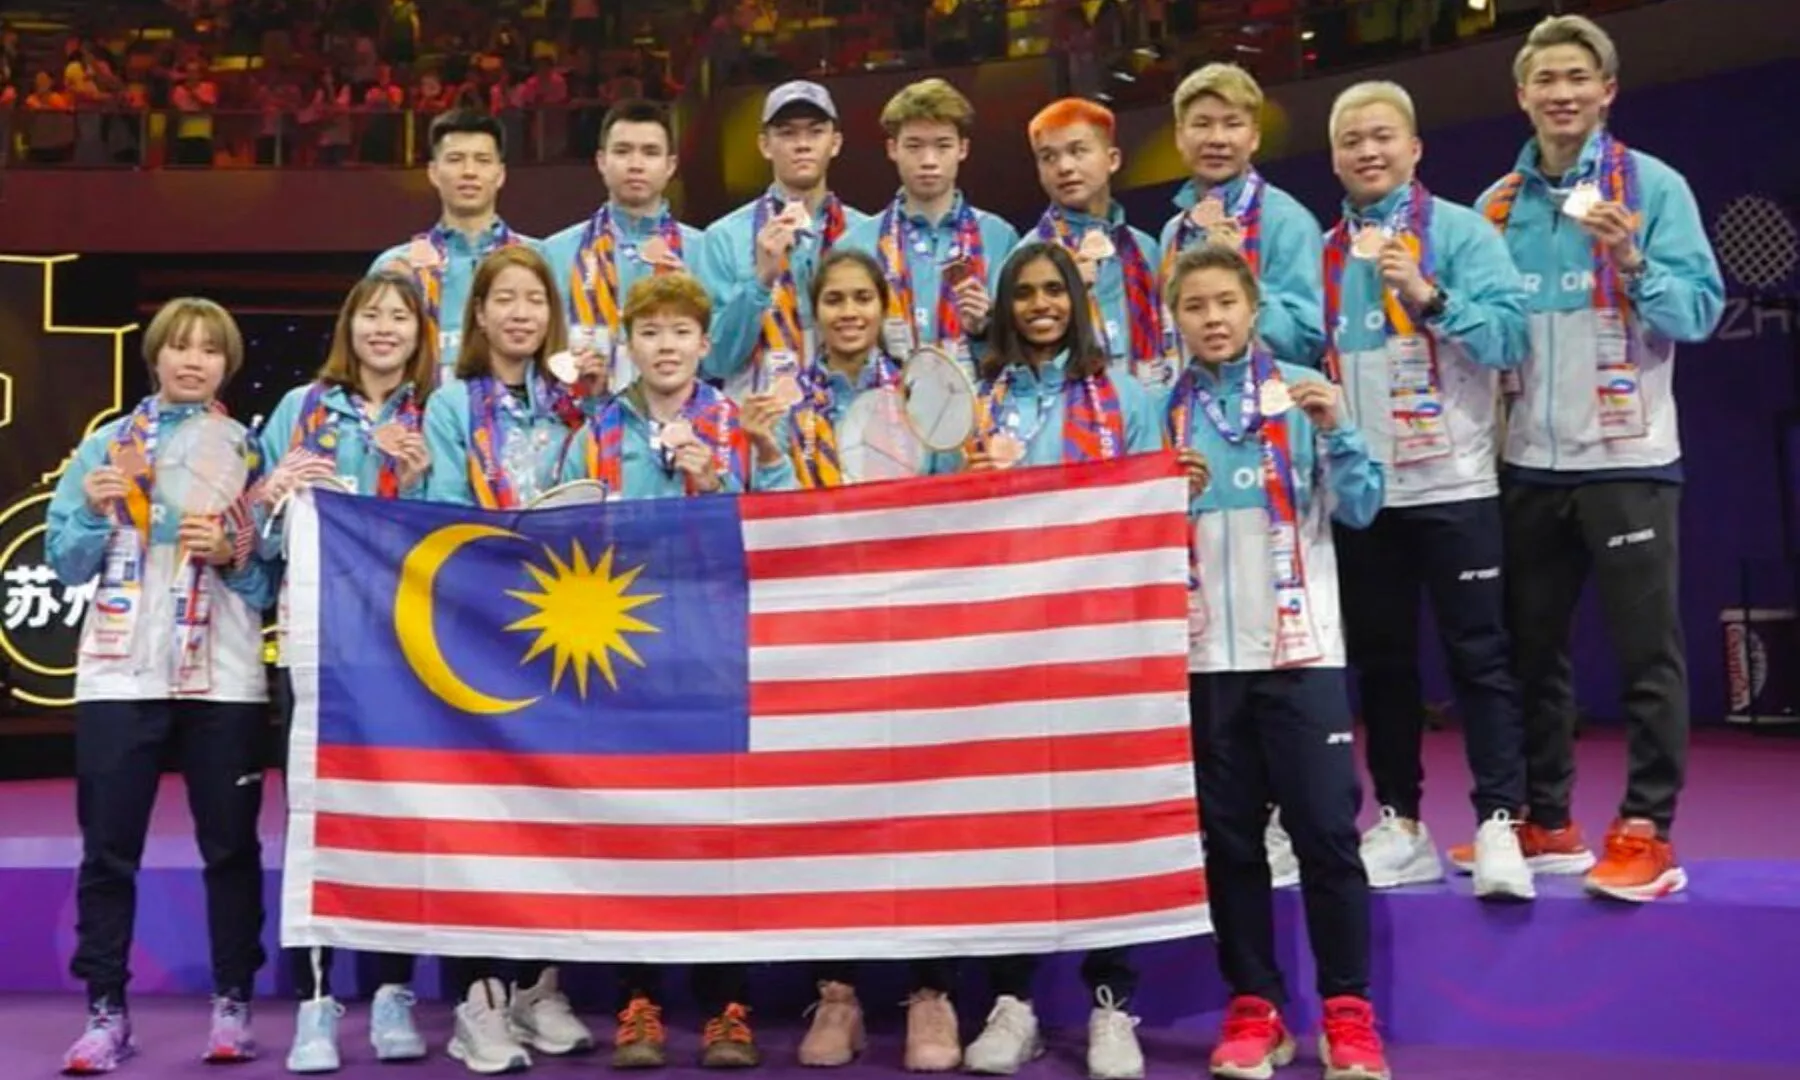 Sudirman Cup Malaysia’s overall record in the tournament